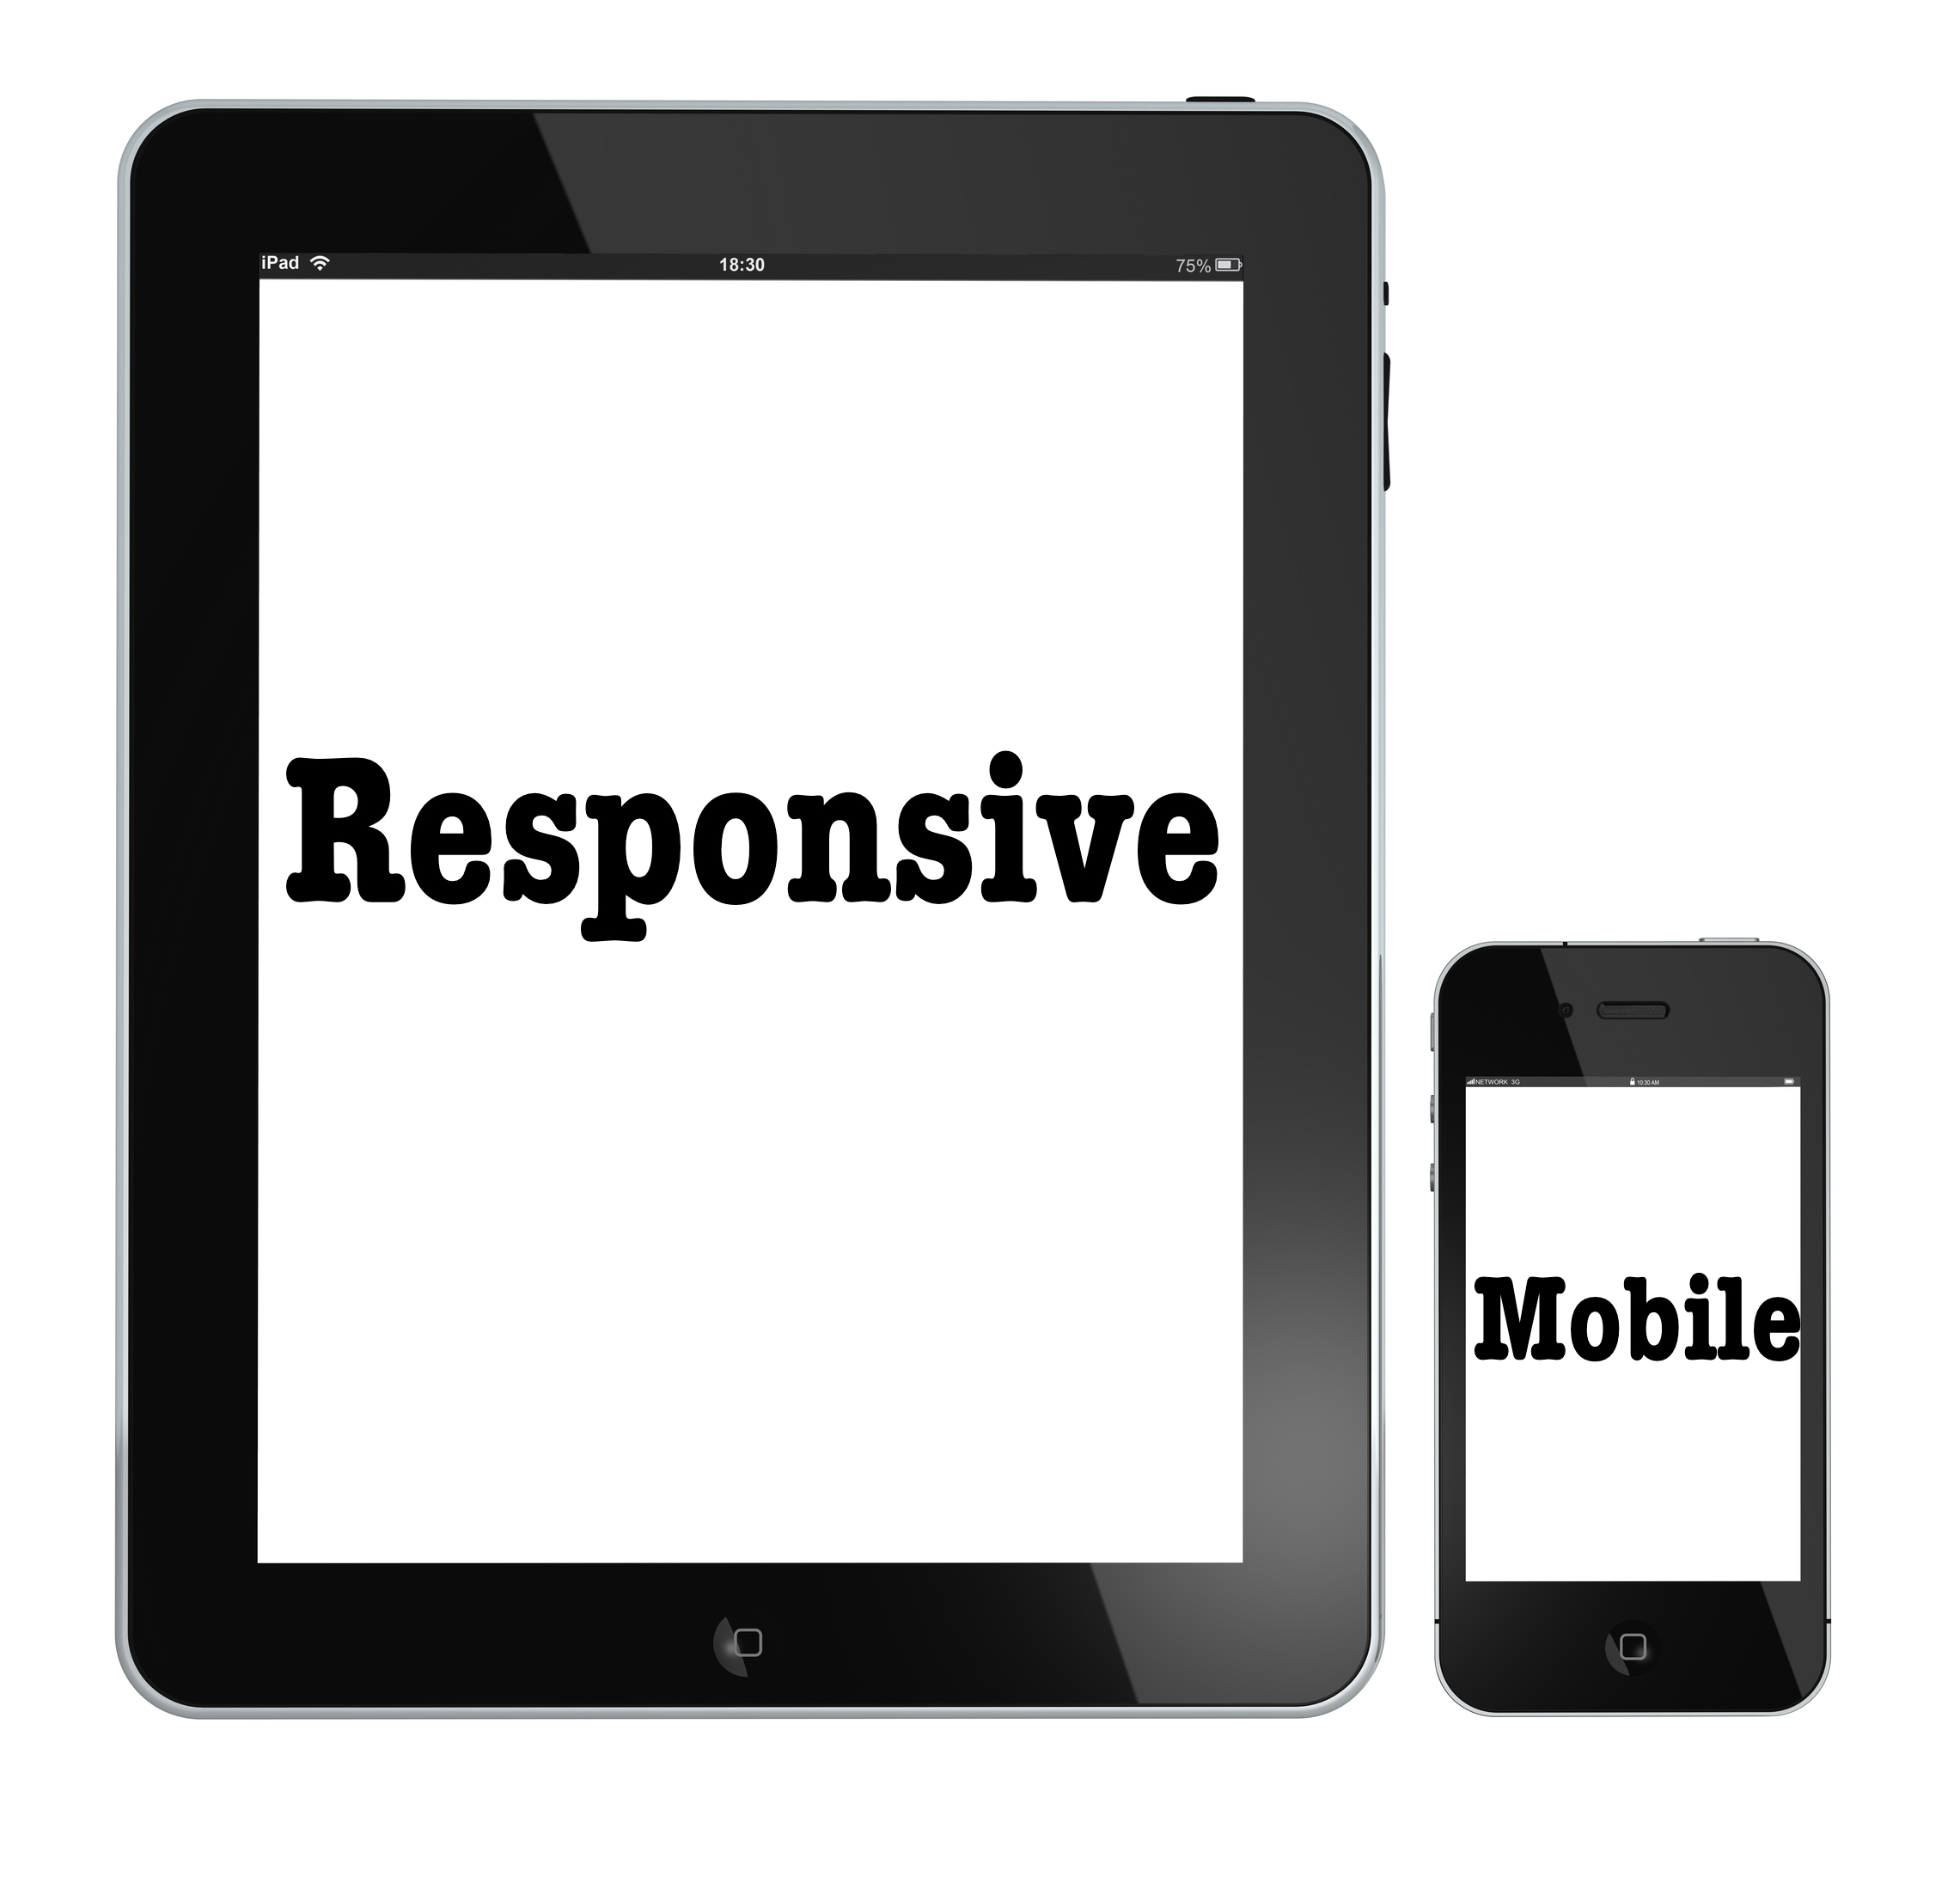 Kansas City Web design for responsive web design and mobile web sites. Let us help you display your website to all of the mobile users in the marketplace.